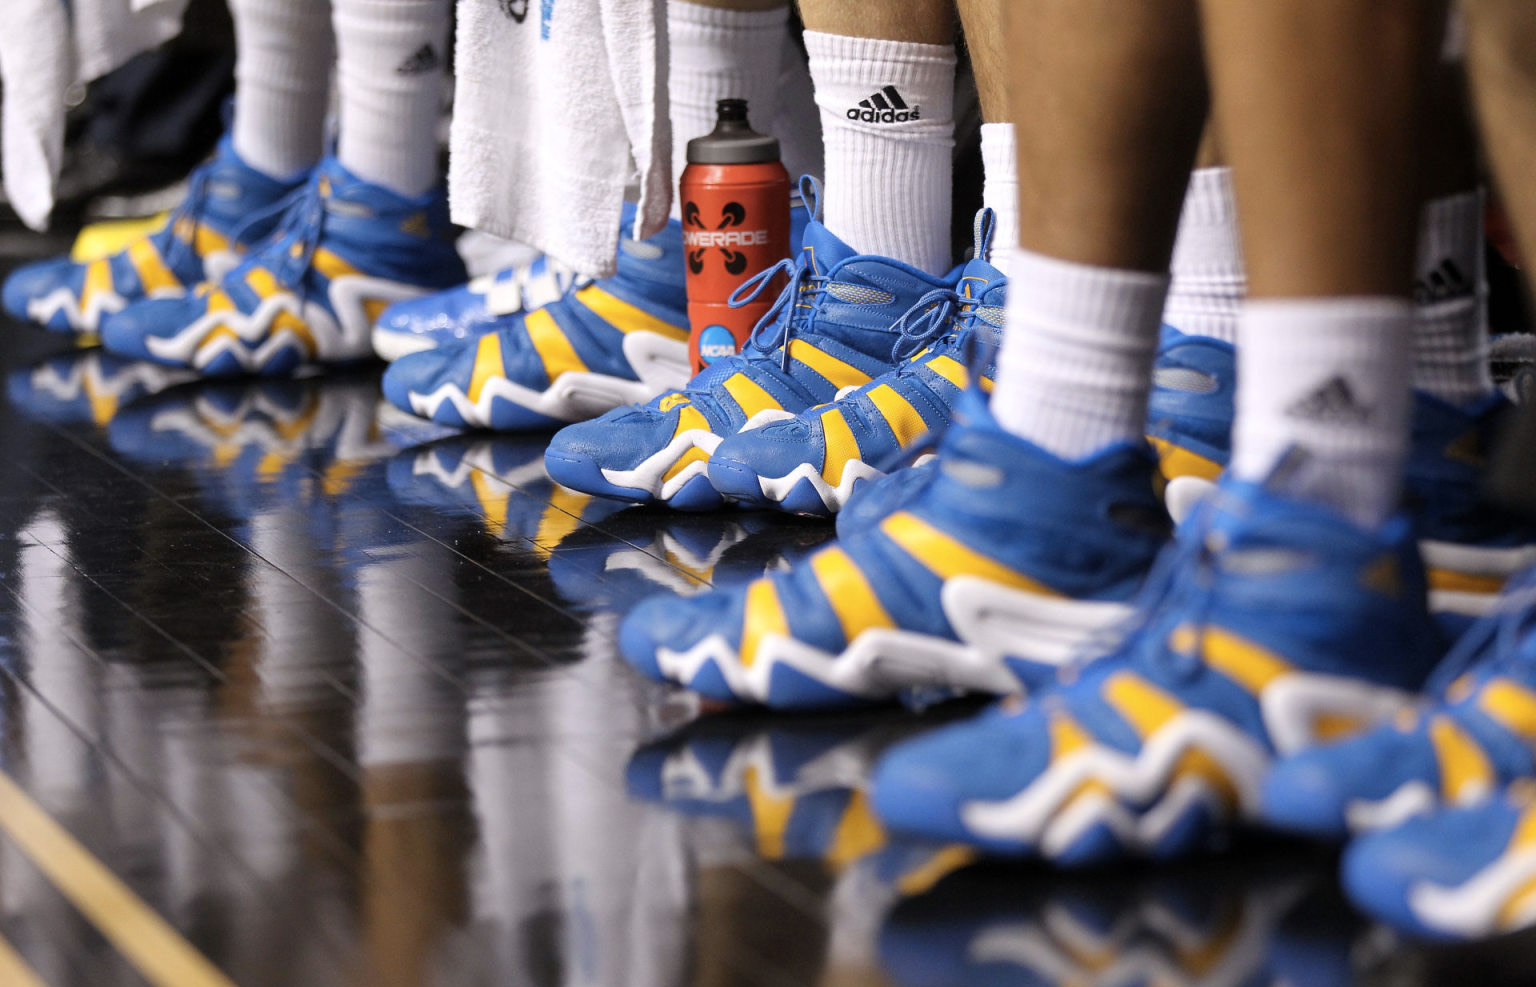 ucla under armour basketball shoes